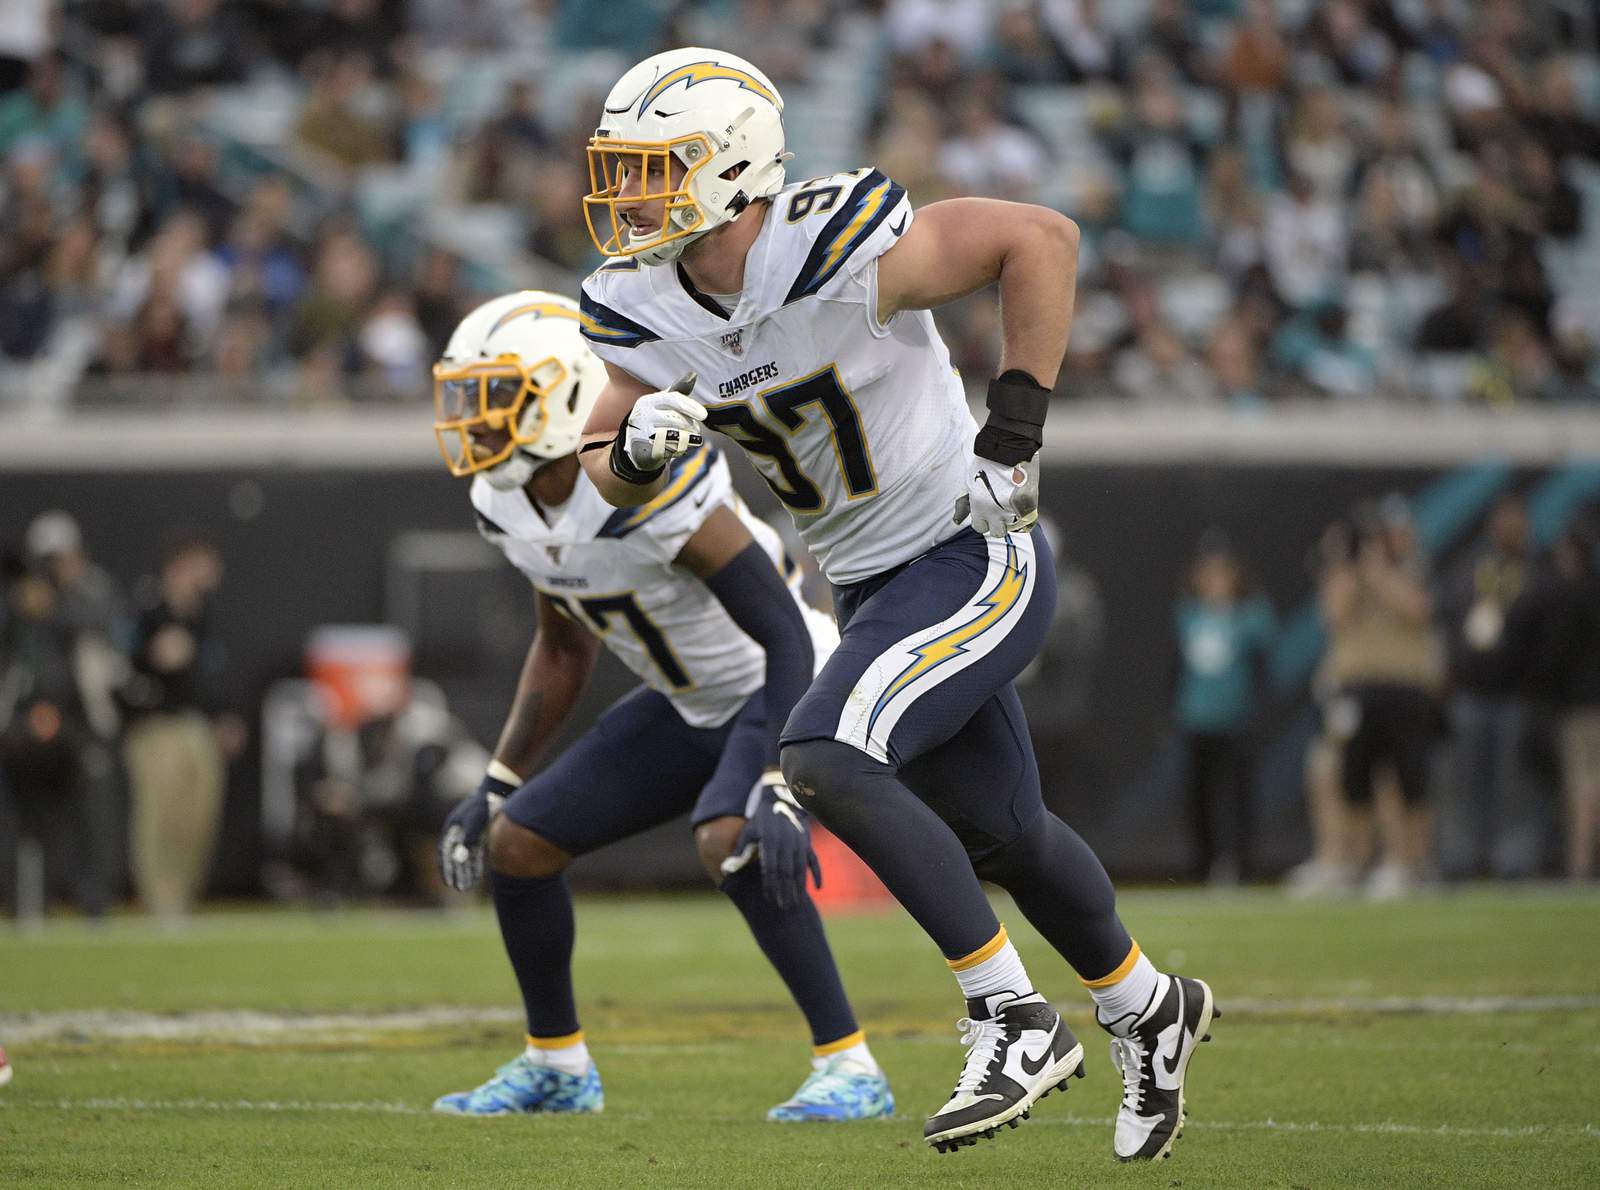 AP Sources: Bosa gets $135 million extension with Chargers